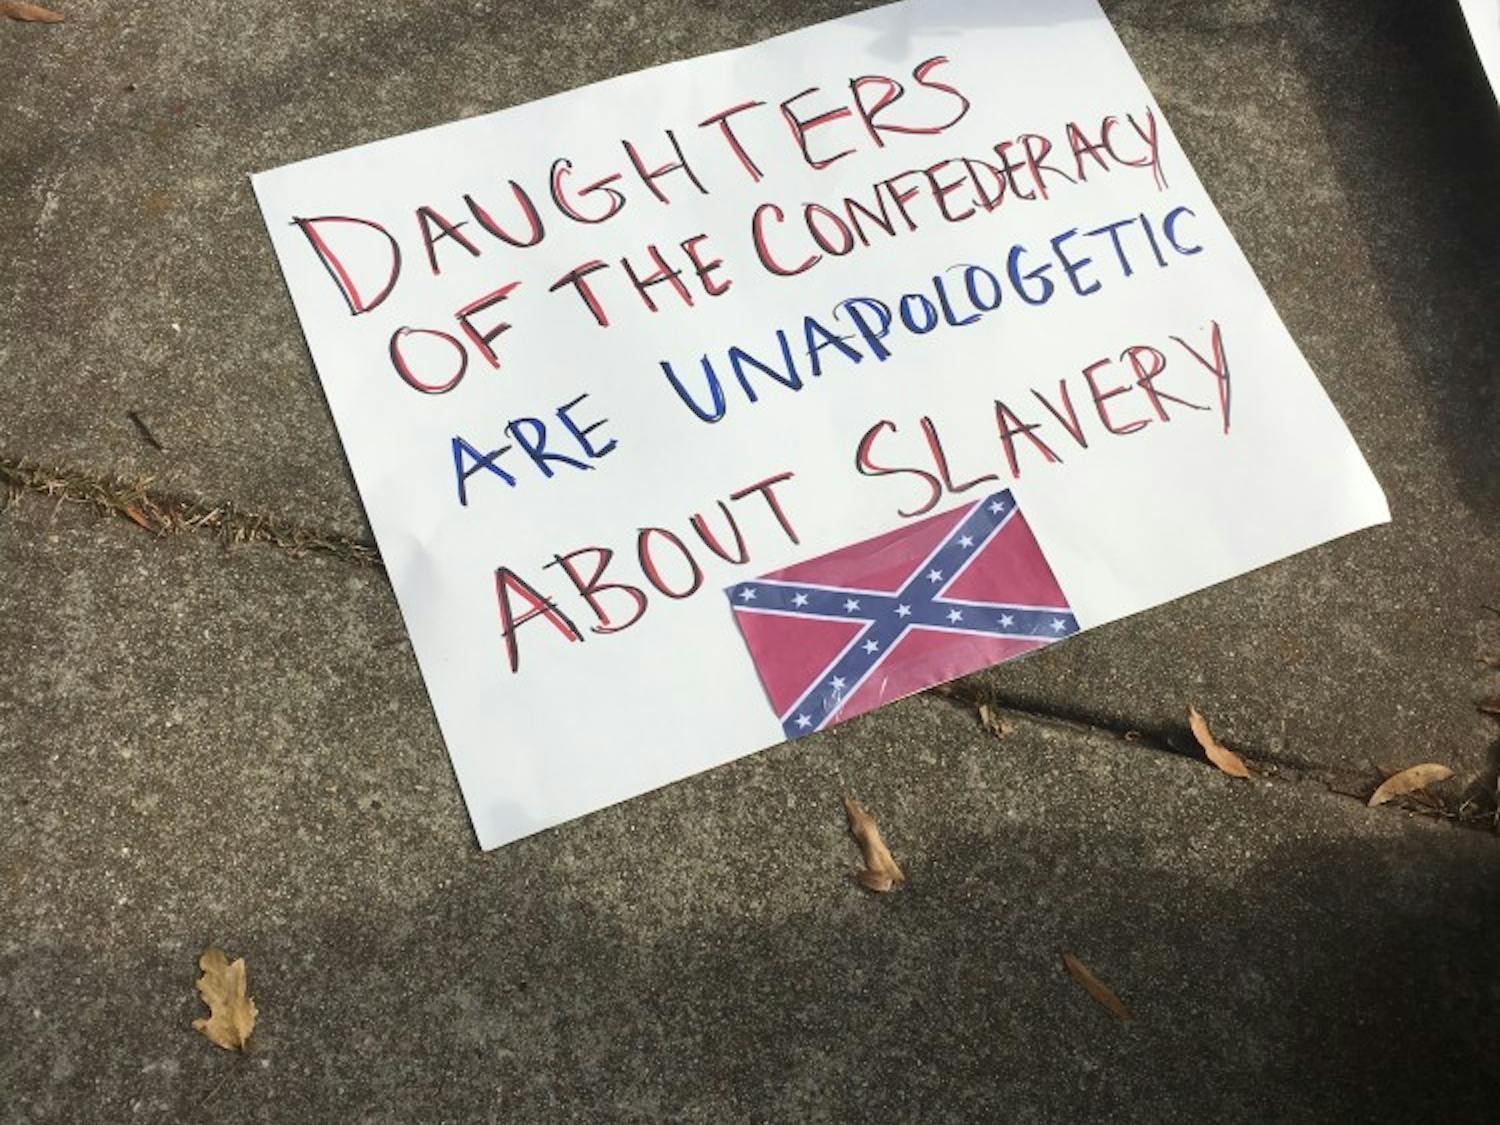 A sign made by a Hillsborough Progressives Taking Action activist in protest of the United Daughters of the Confederacy.